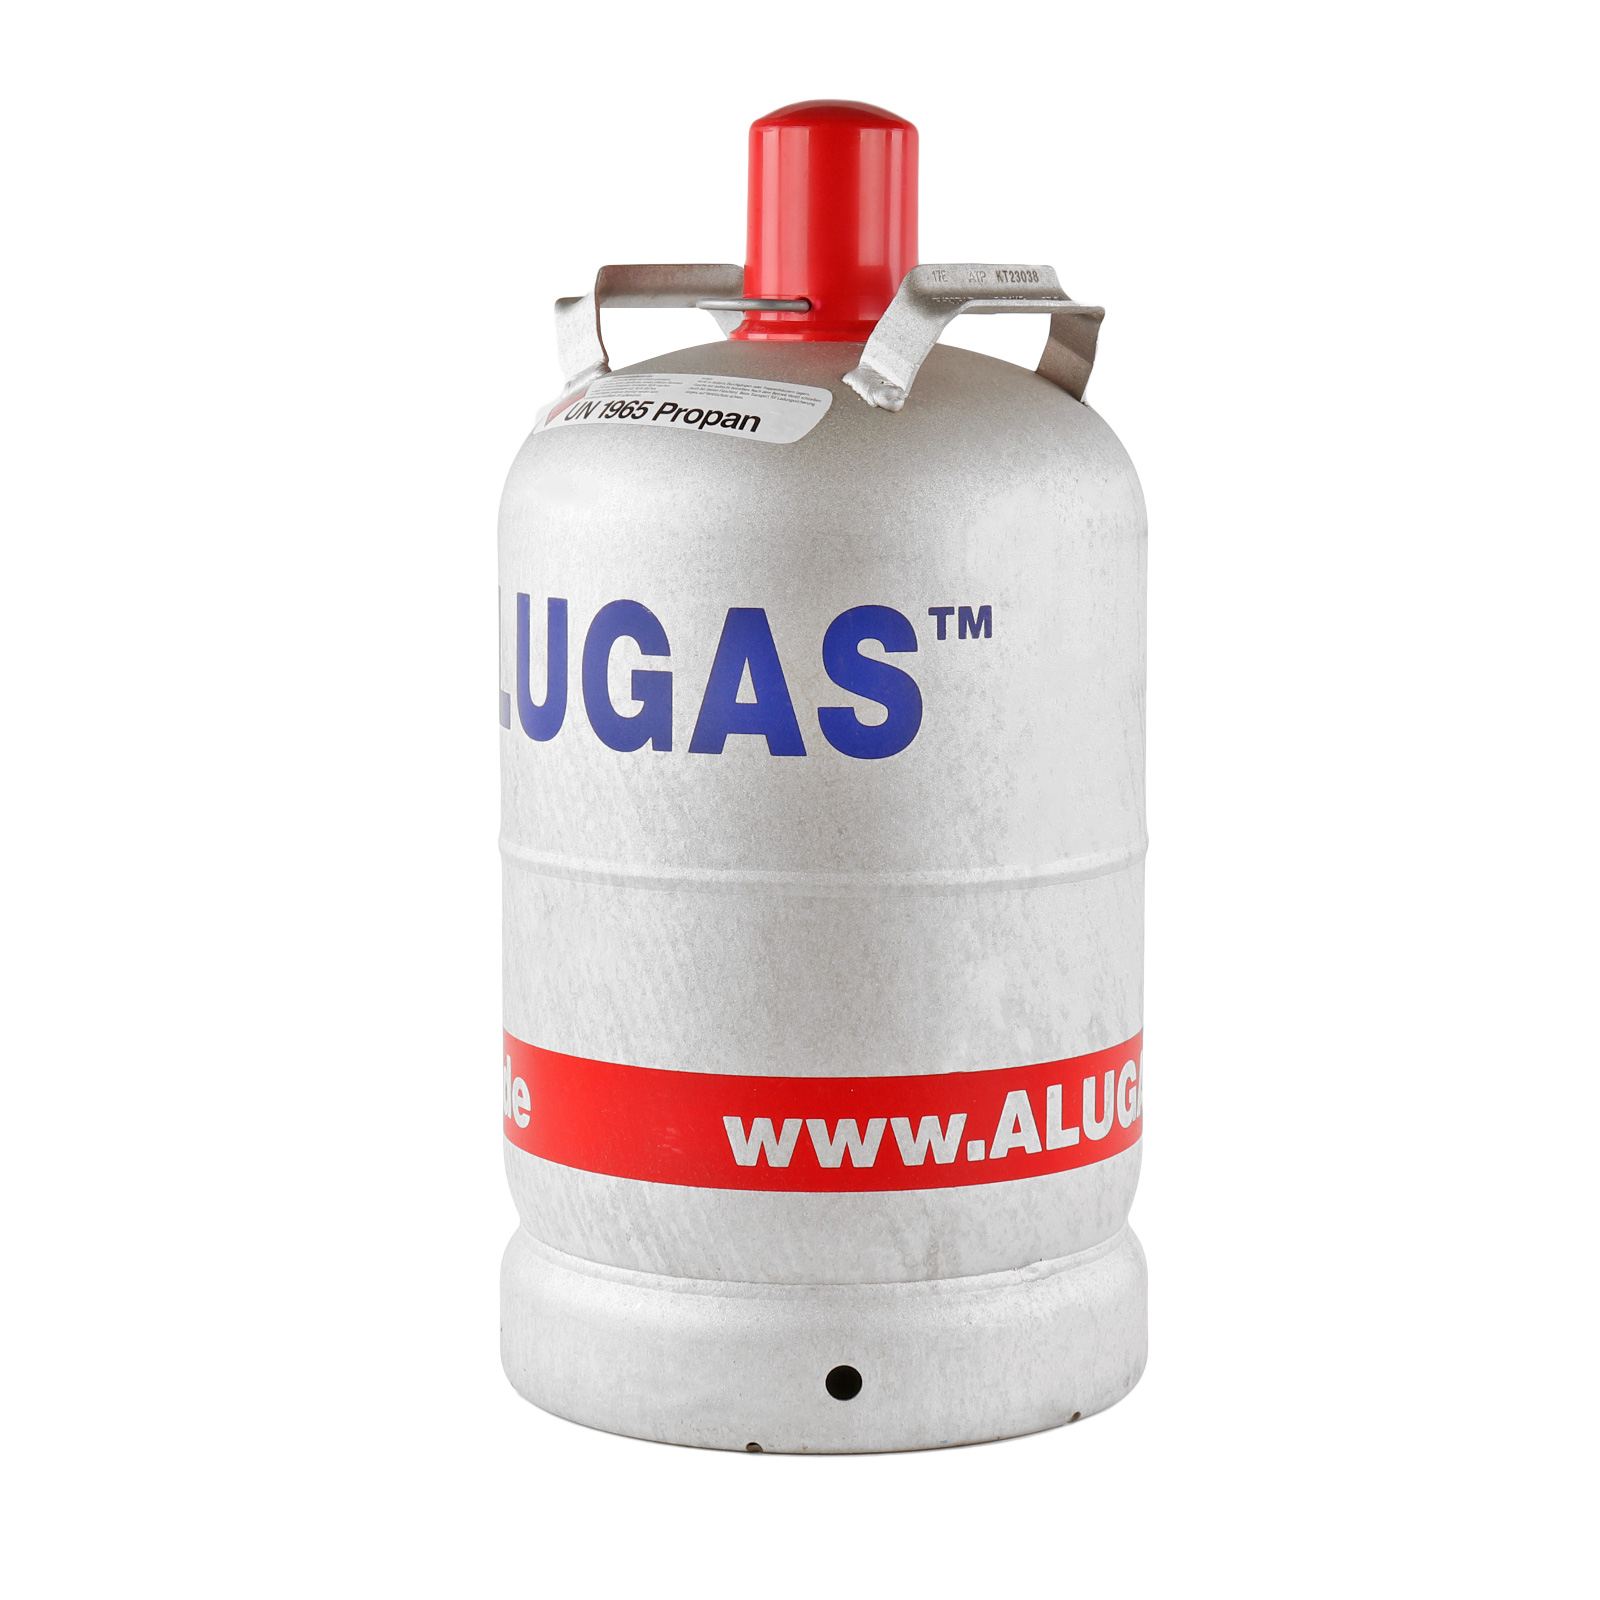 124,50 €  / 1 Stck. 2 x 11 kg Alugas Camping Propan Gas Flasche leer 2 Stck. 